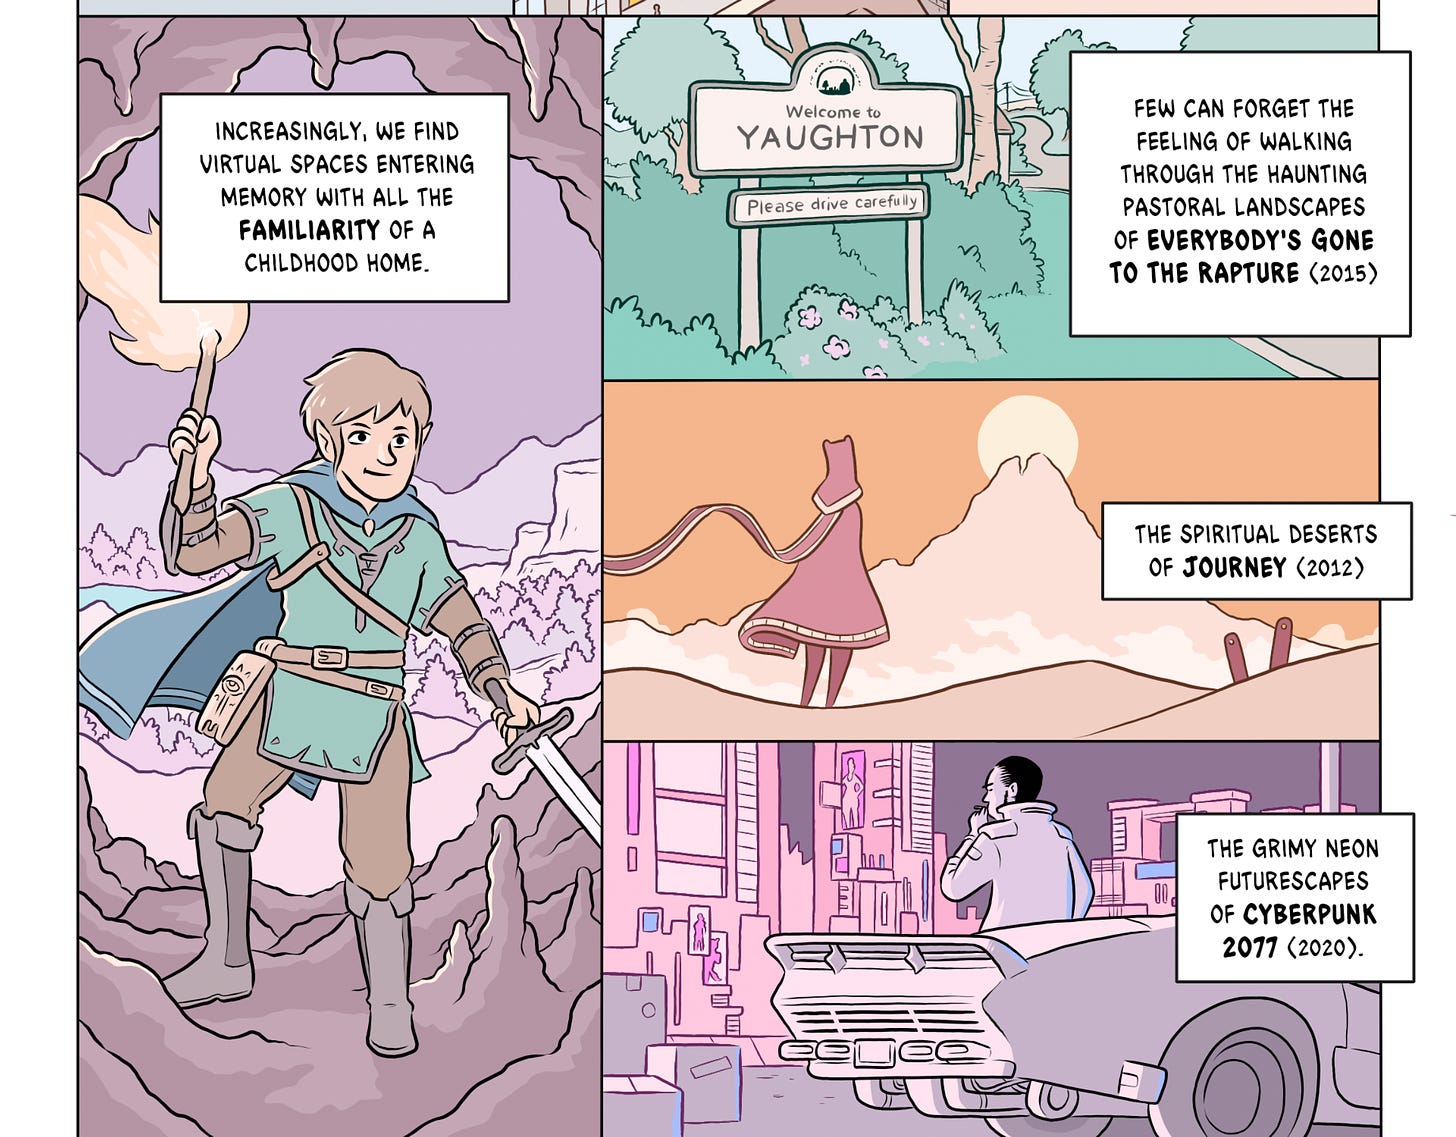 Illustrated images from Breath of the Wild, Everybody's Gone to the Rapture, Journey and Cyberpunk 2077. The Cyberpunk image shows a man leaning against his car infront of a futuristic megopolis. The text describes the unforgettable feeling of playing games in these diverse settigns.